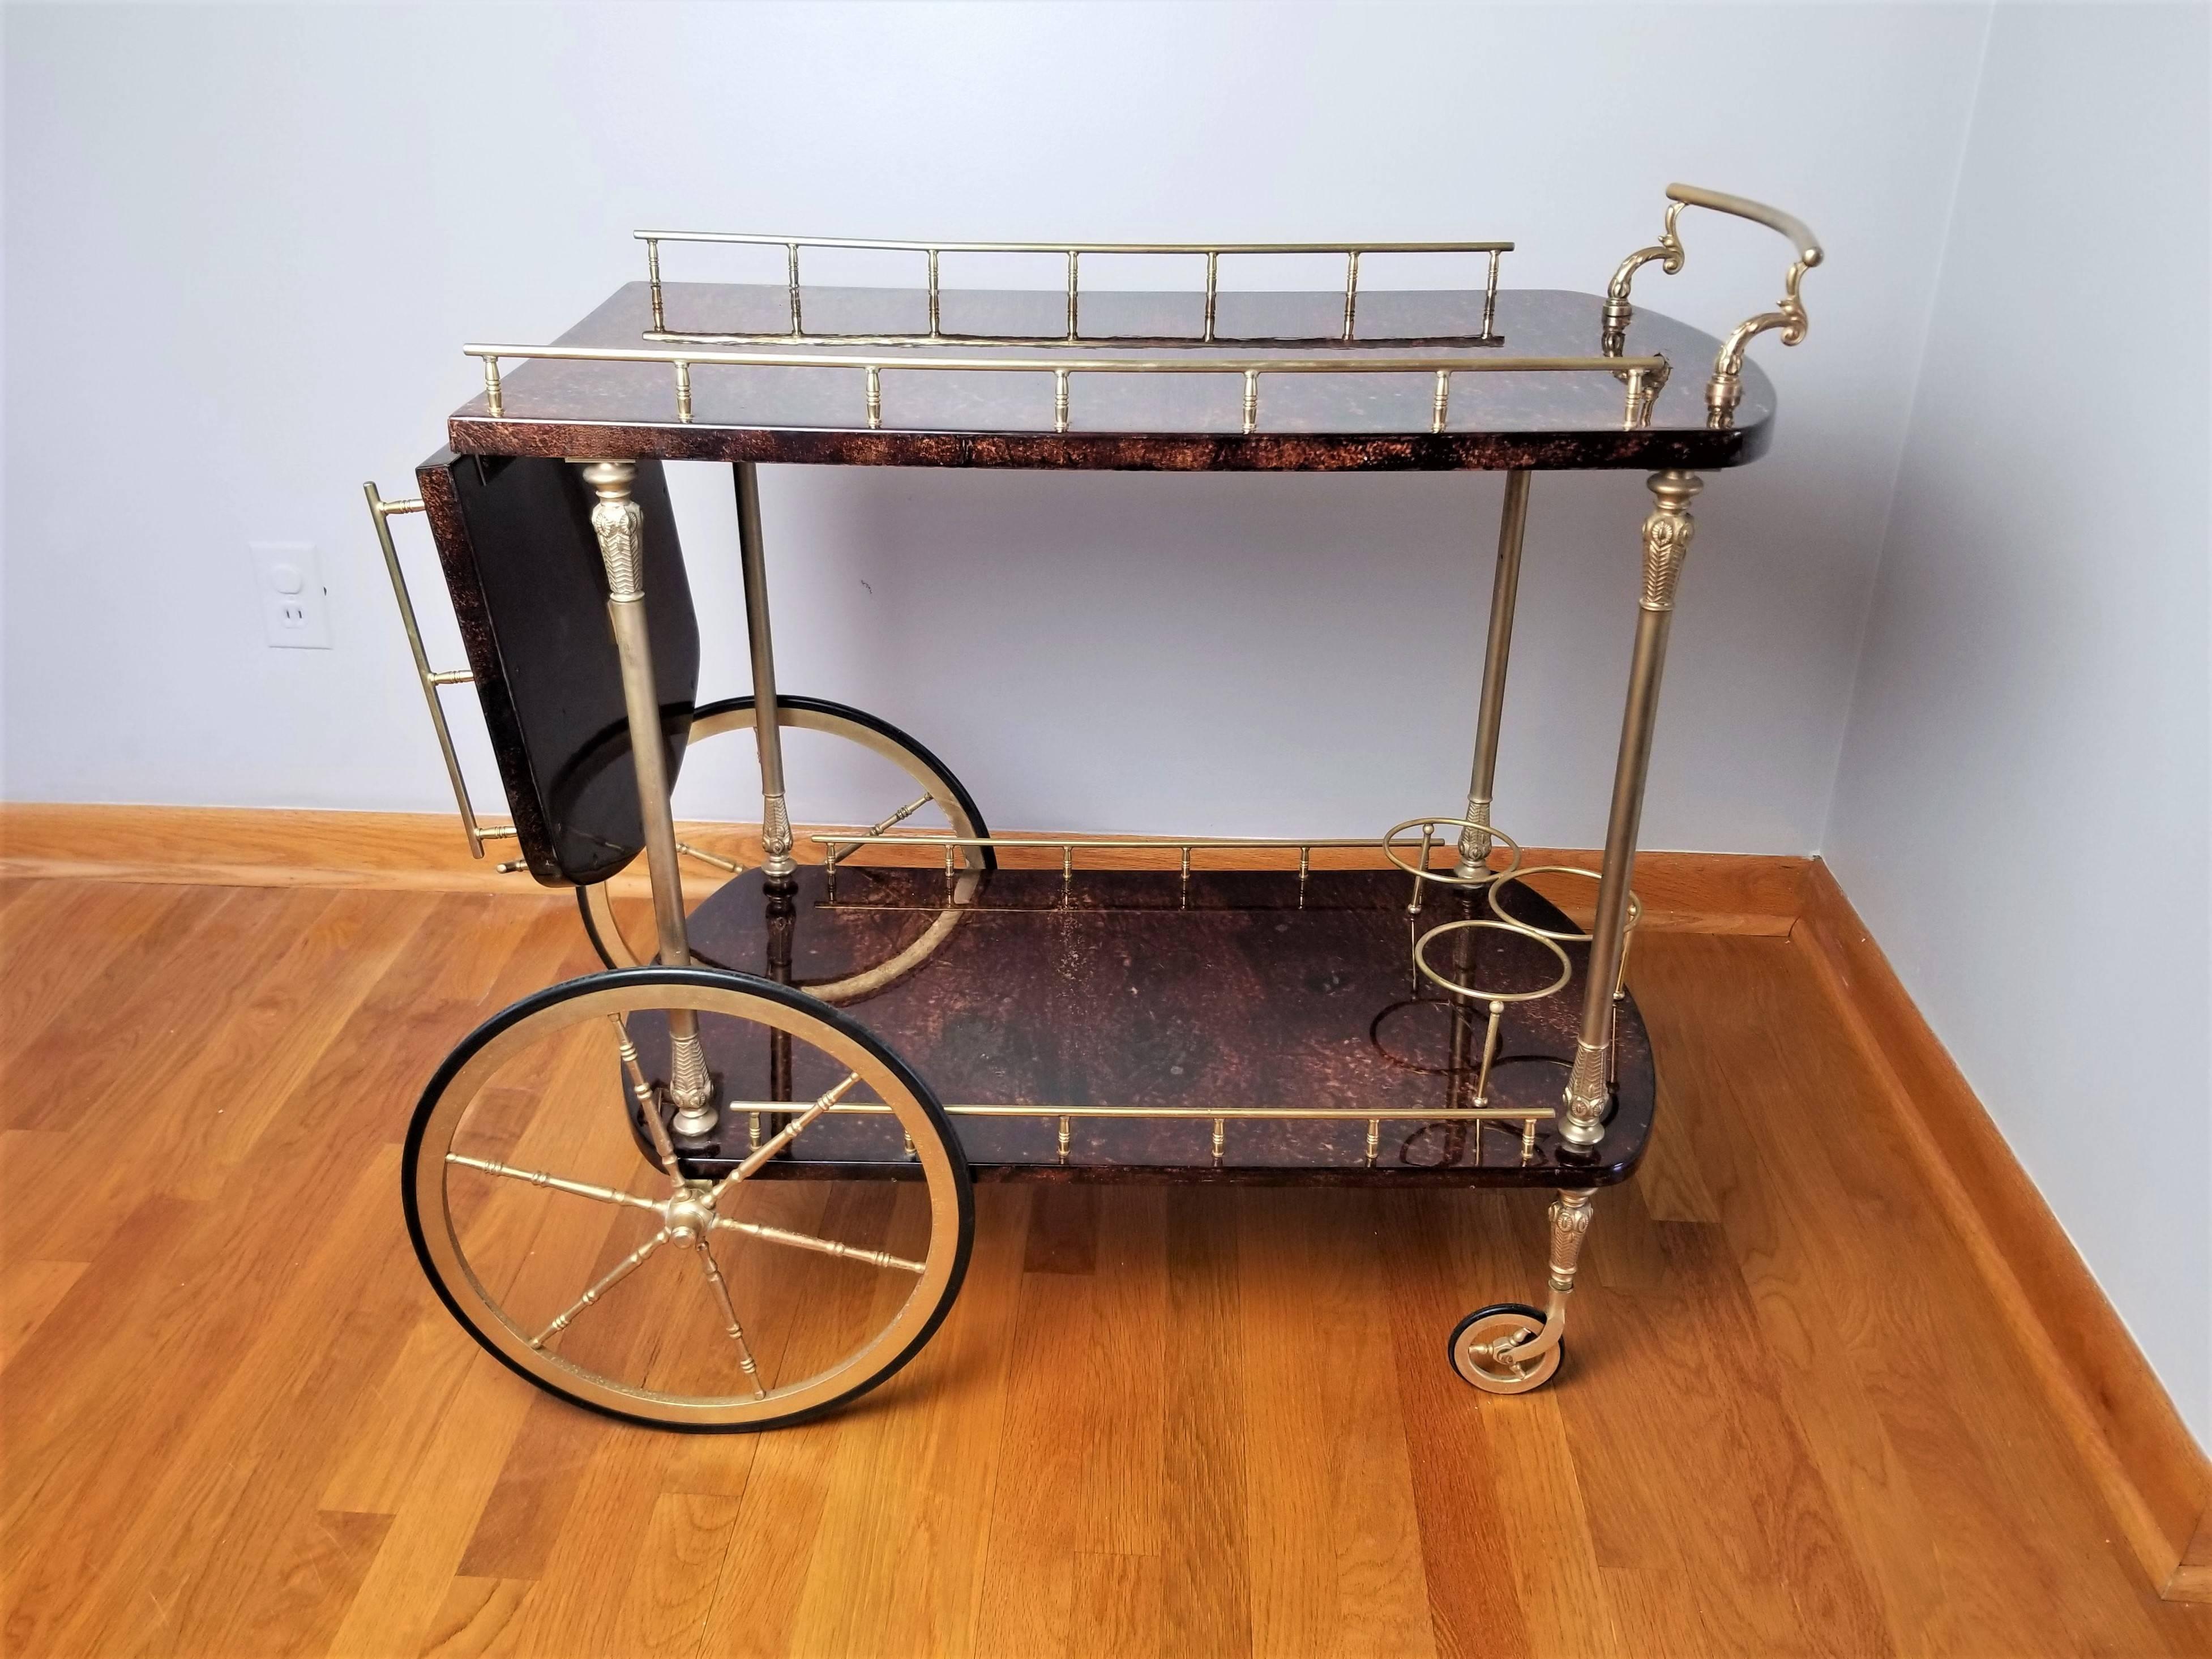 Handsome rich brown lacquered goatskin or parchment bar cart with brass details by Aldo Tura, Italy, circa 1950s. Dimensions with leaf dropped are 
31.5